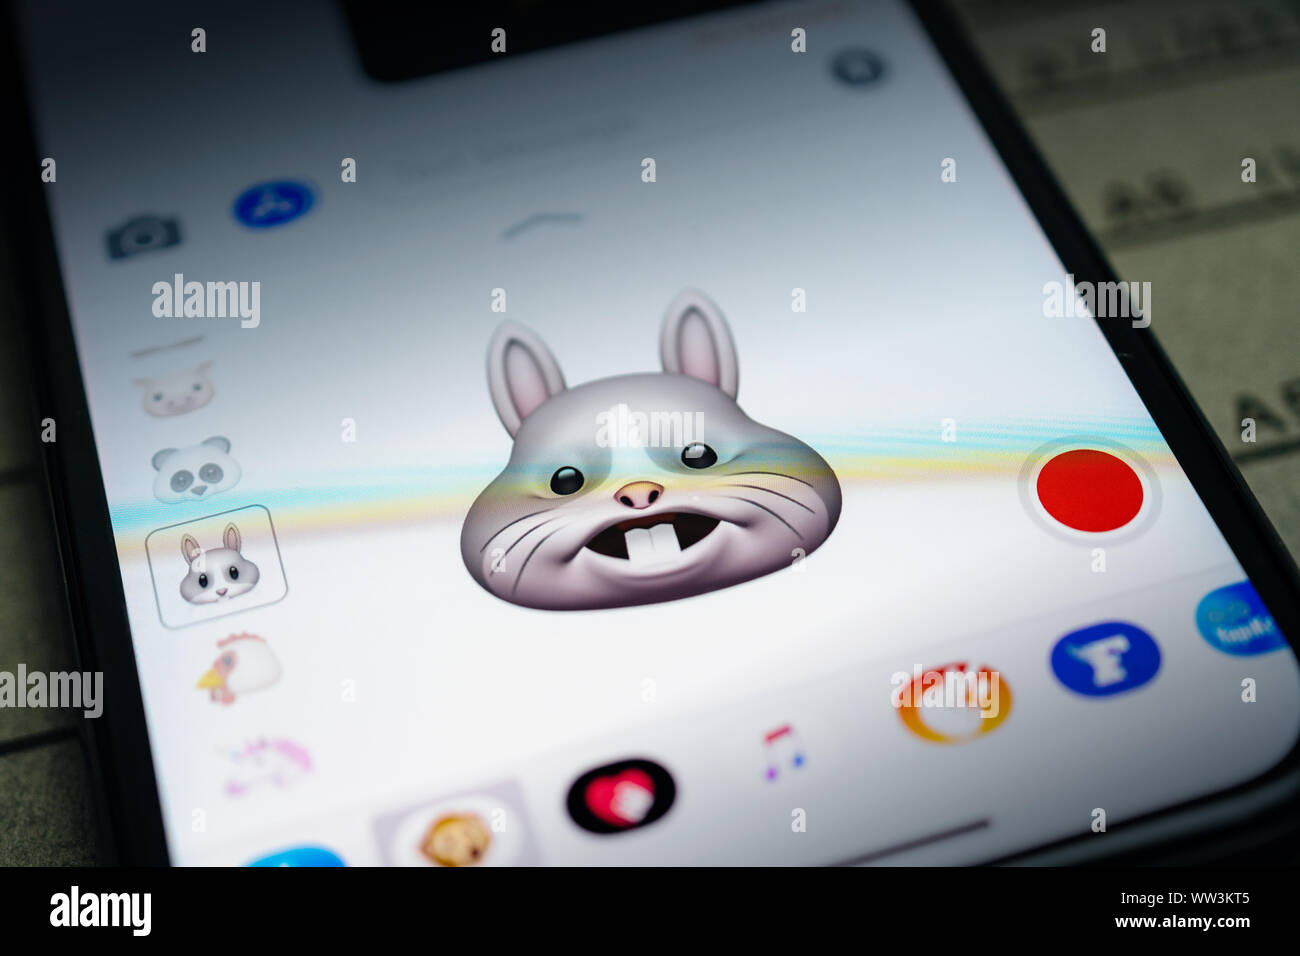 Paris, France - Sep 12, 2019: Latest iPhone 11 Pro featuring multiple Animoji character with face of rabbit expressing yelling face sentiments Stock Photo